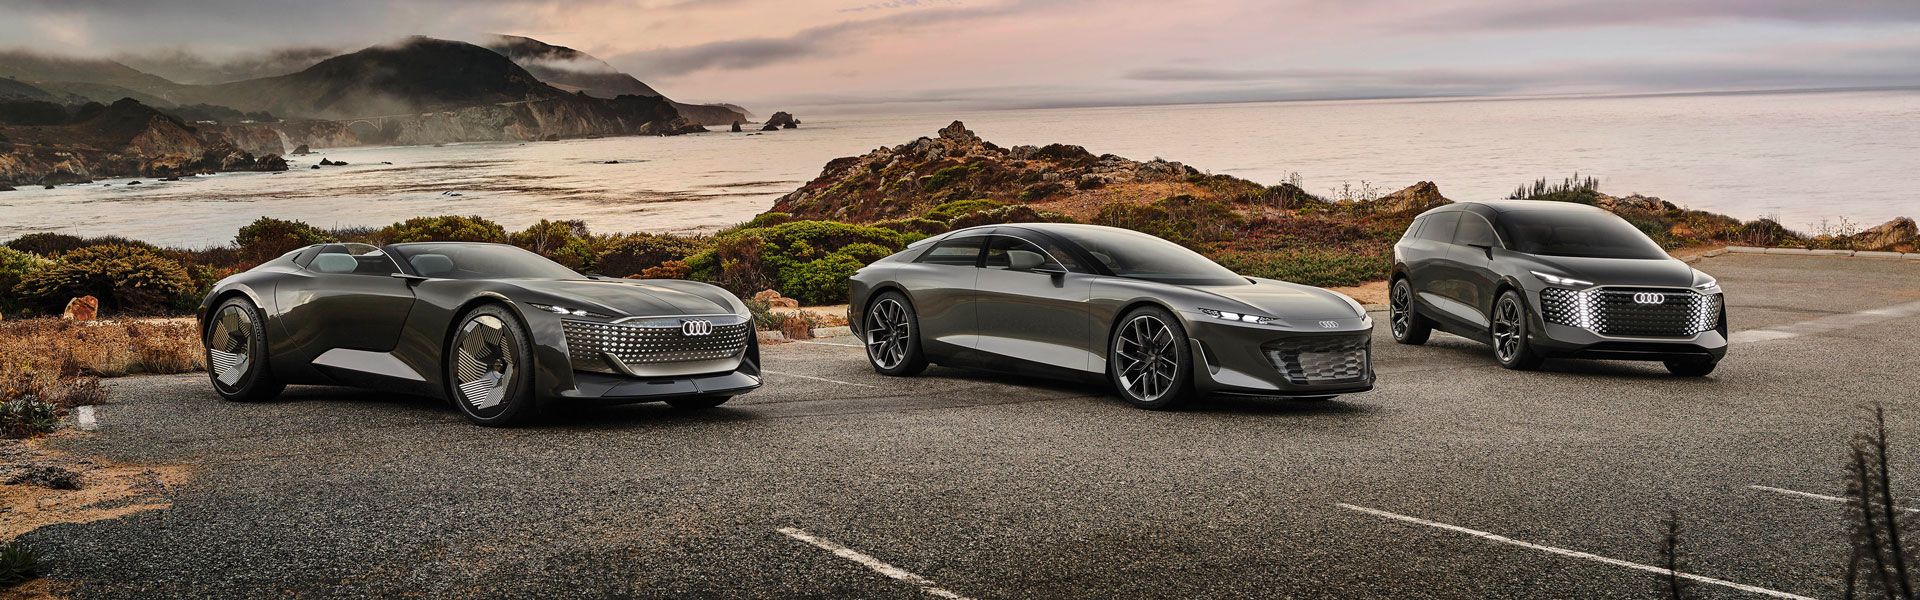 Audi concept cars in front of picturesque coast